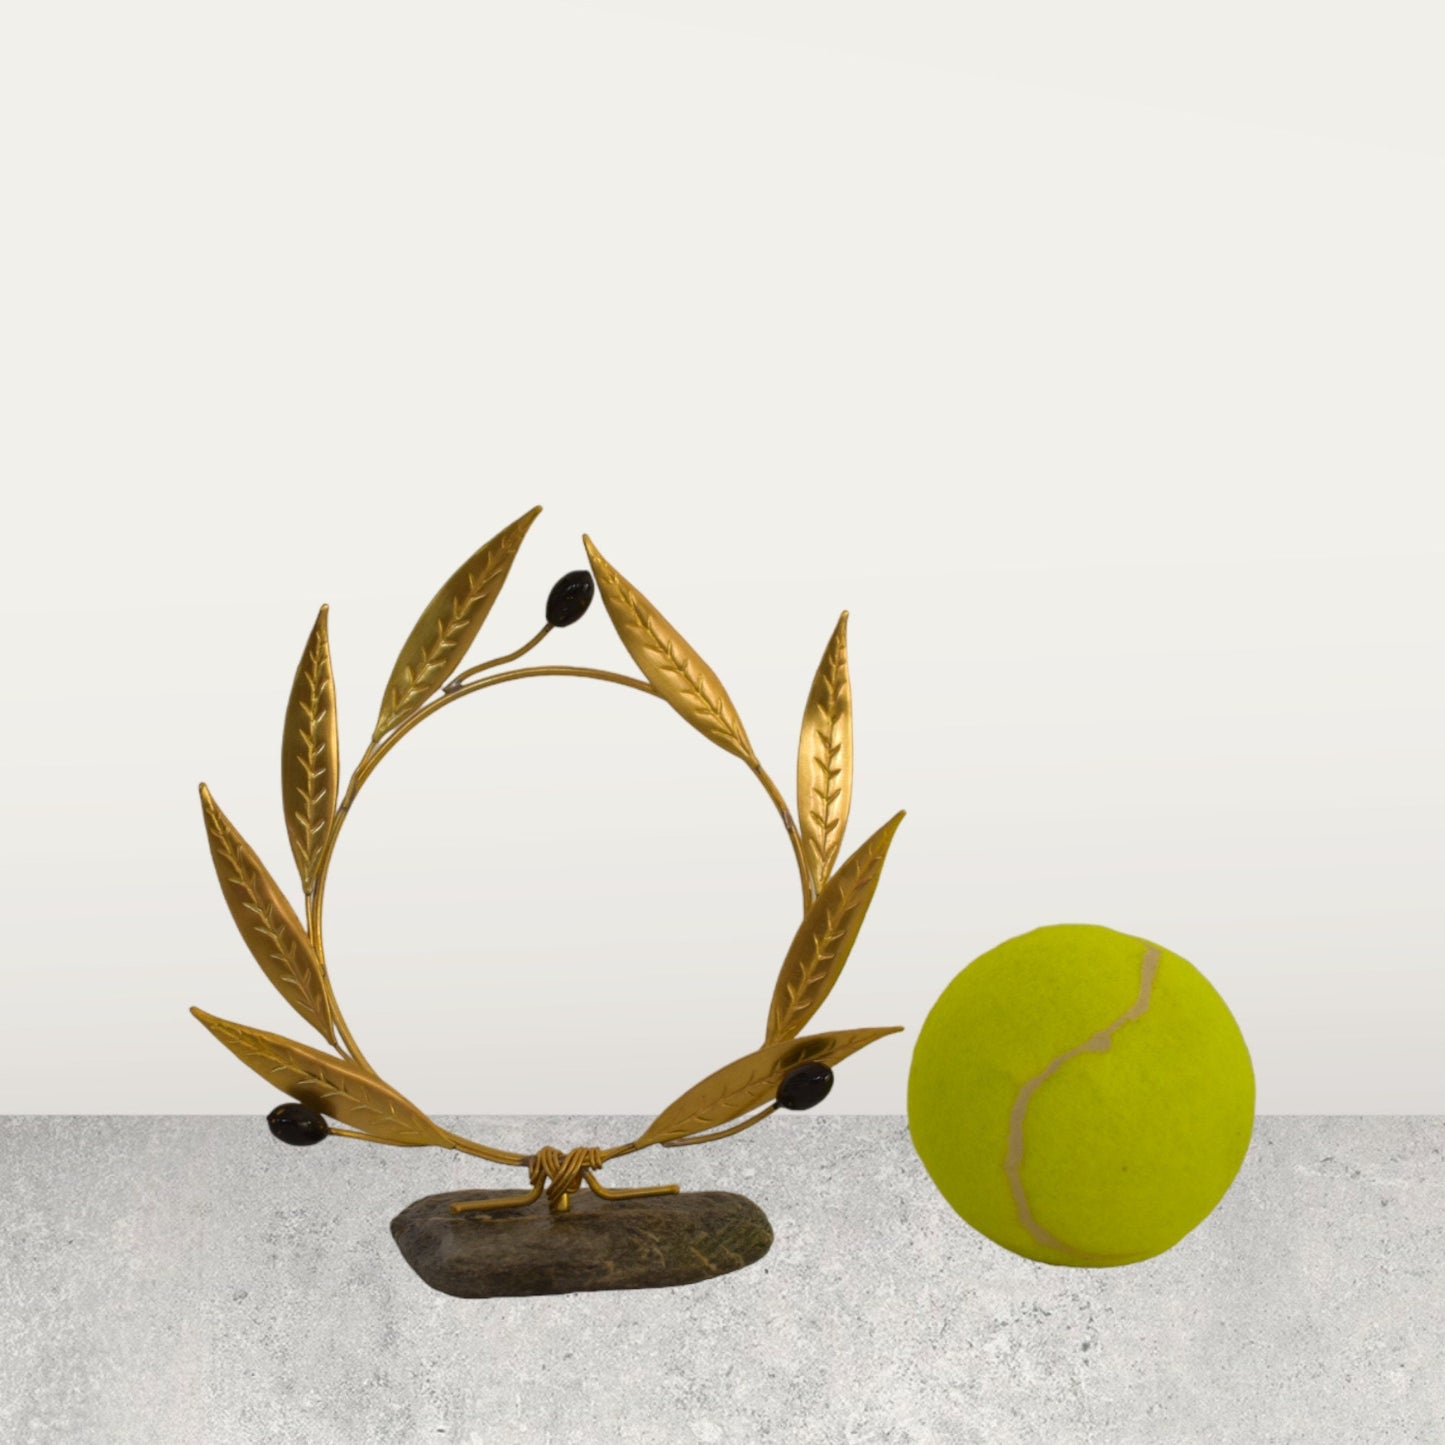 Kotinos  - Olive Wreath - Prize for the Winner at the Ancient Olympic Games - pure bronze  statue